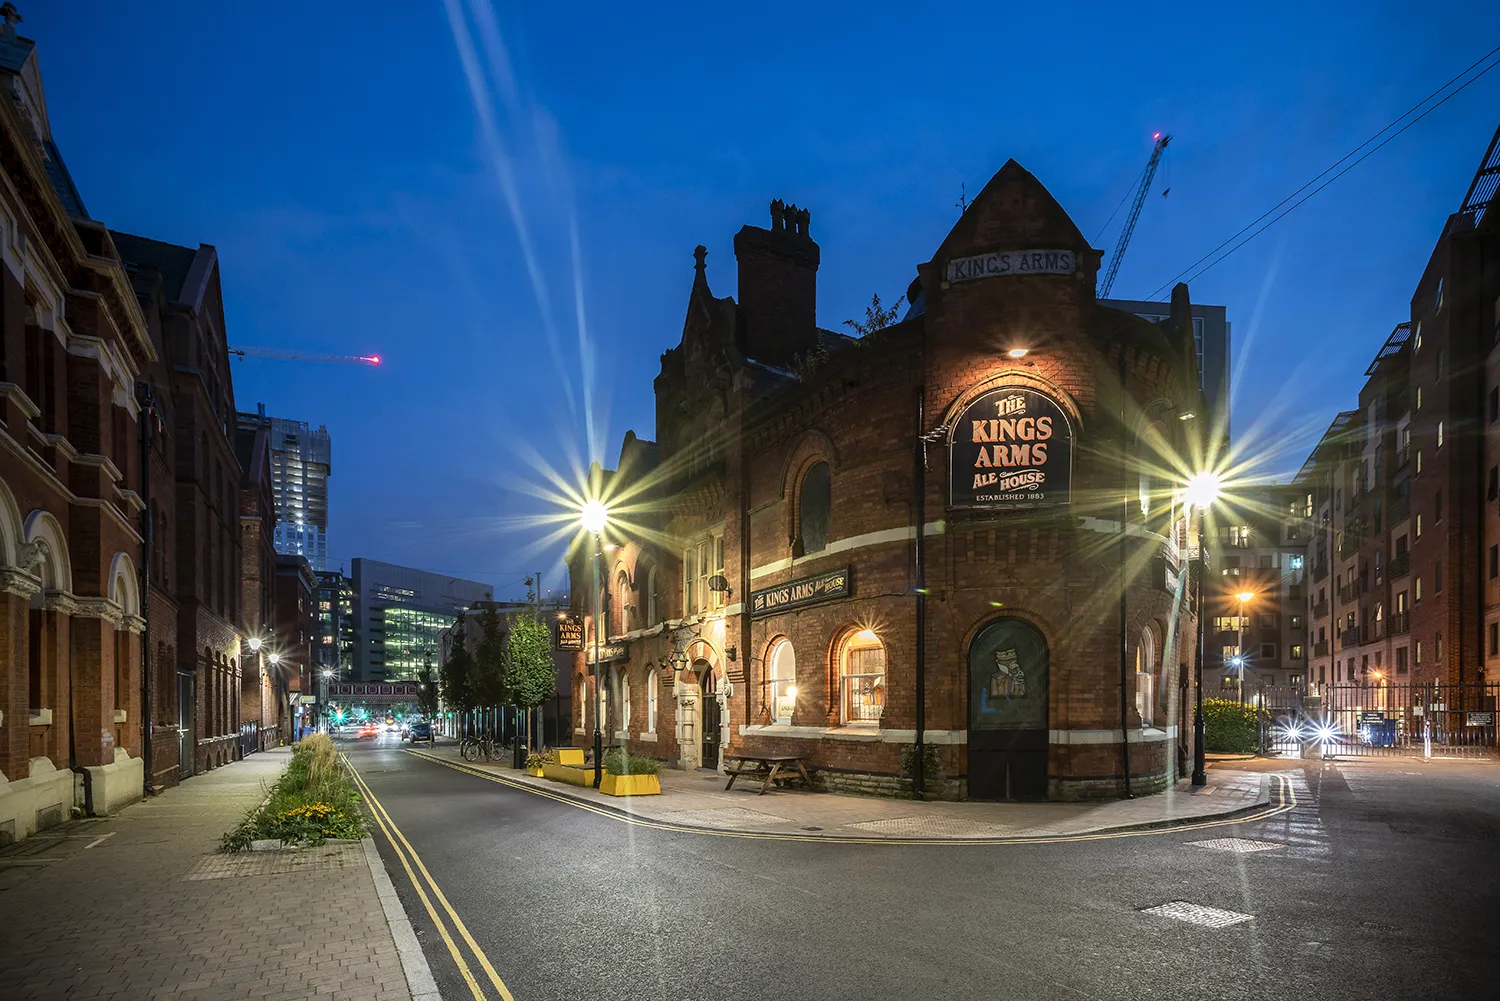 The Kings Arms Pub Manchester Photo Manchester Landscapes City 2